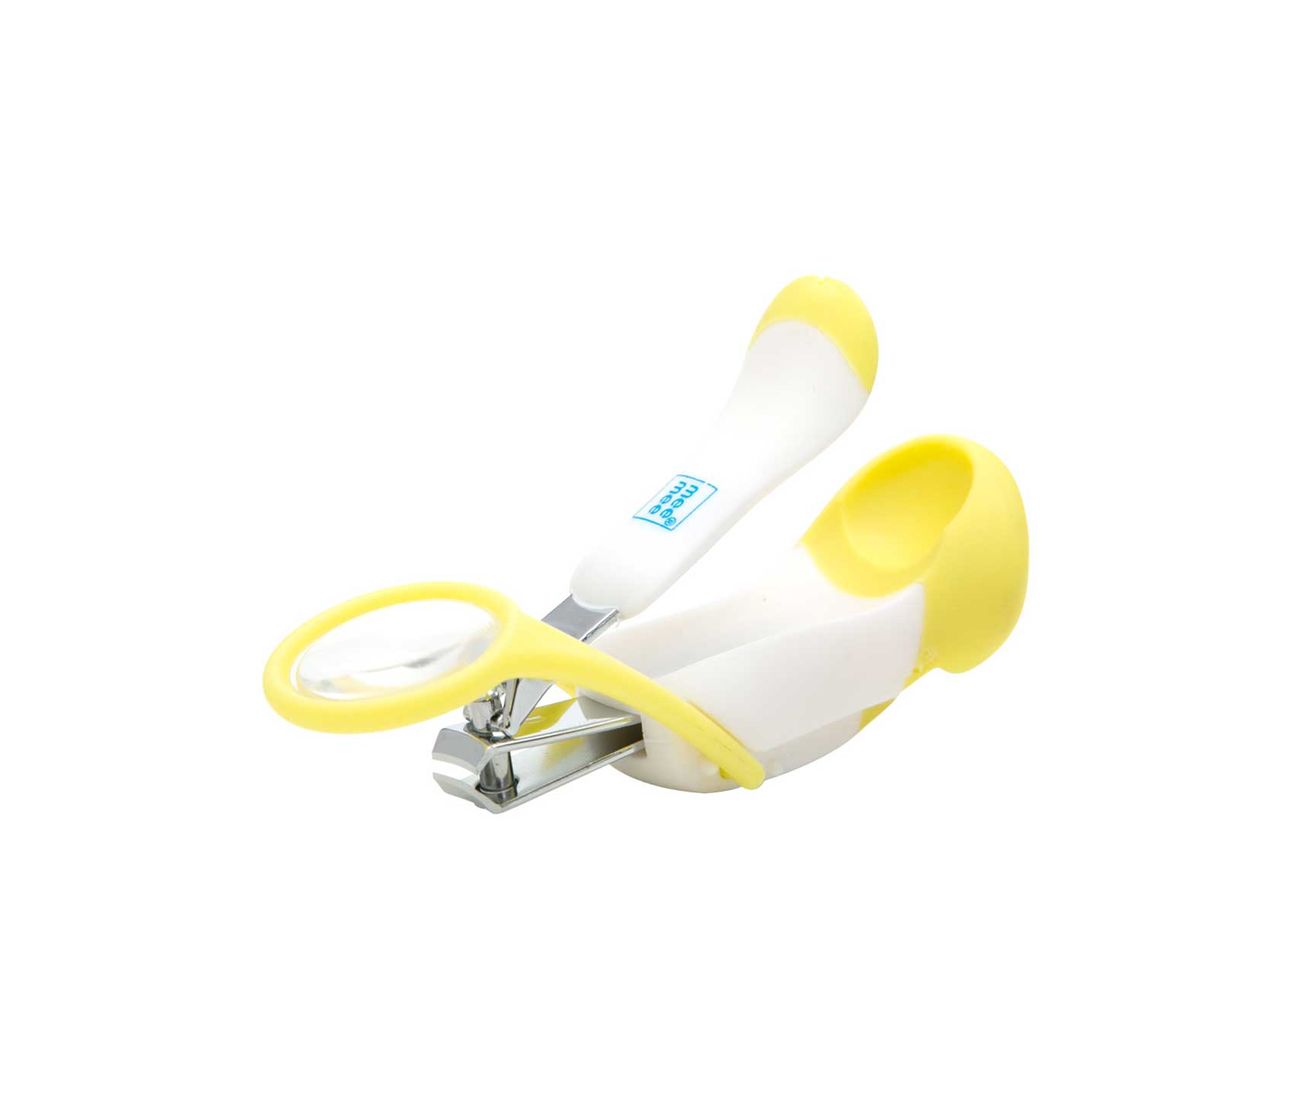 MEE MEE Gentle Nail Clipper with Magnifier 0+m Age